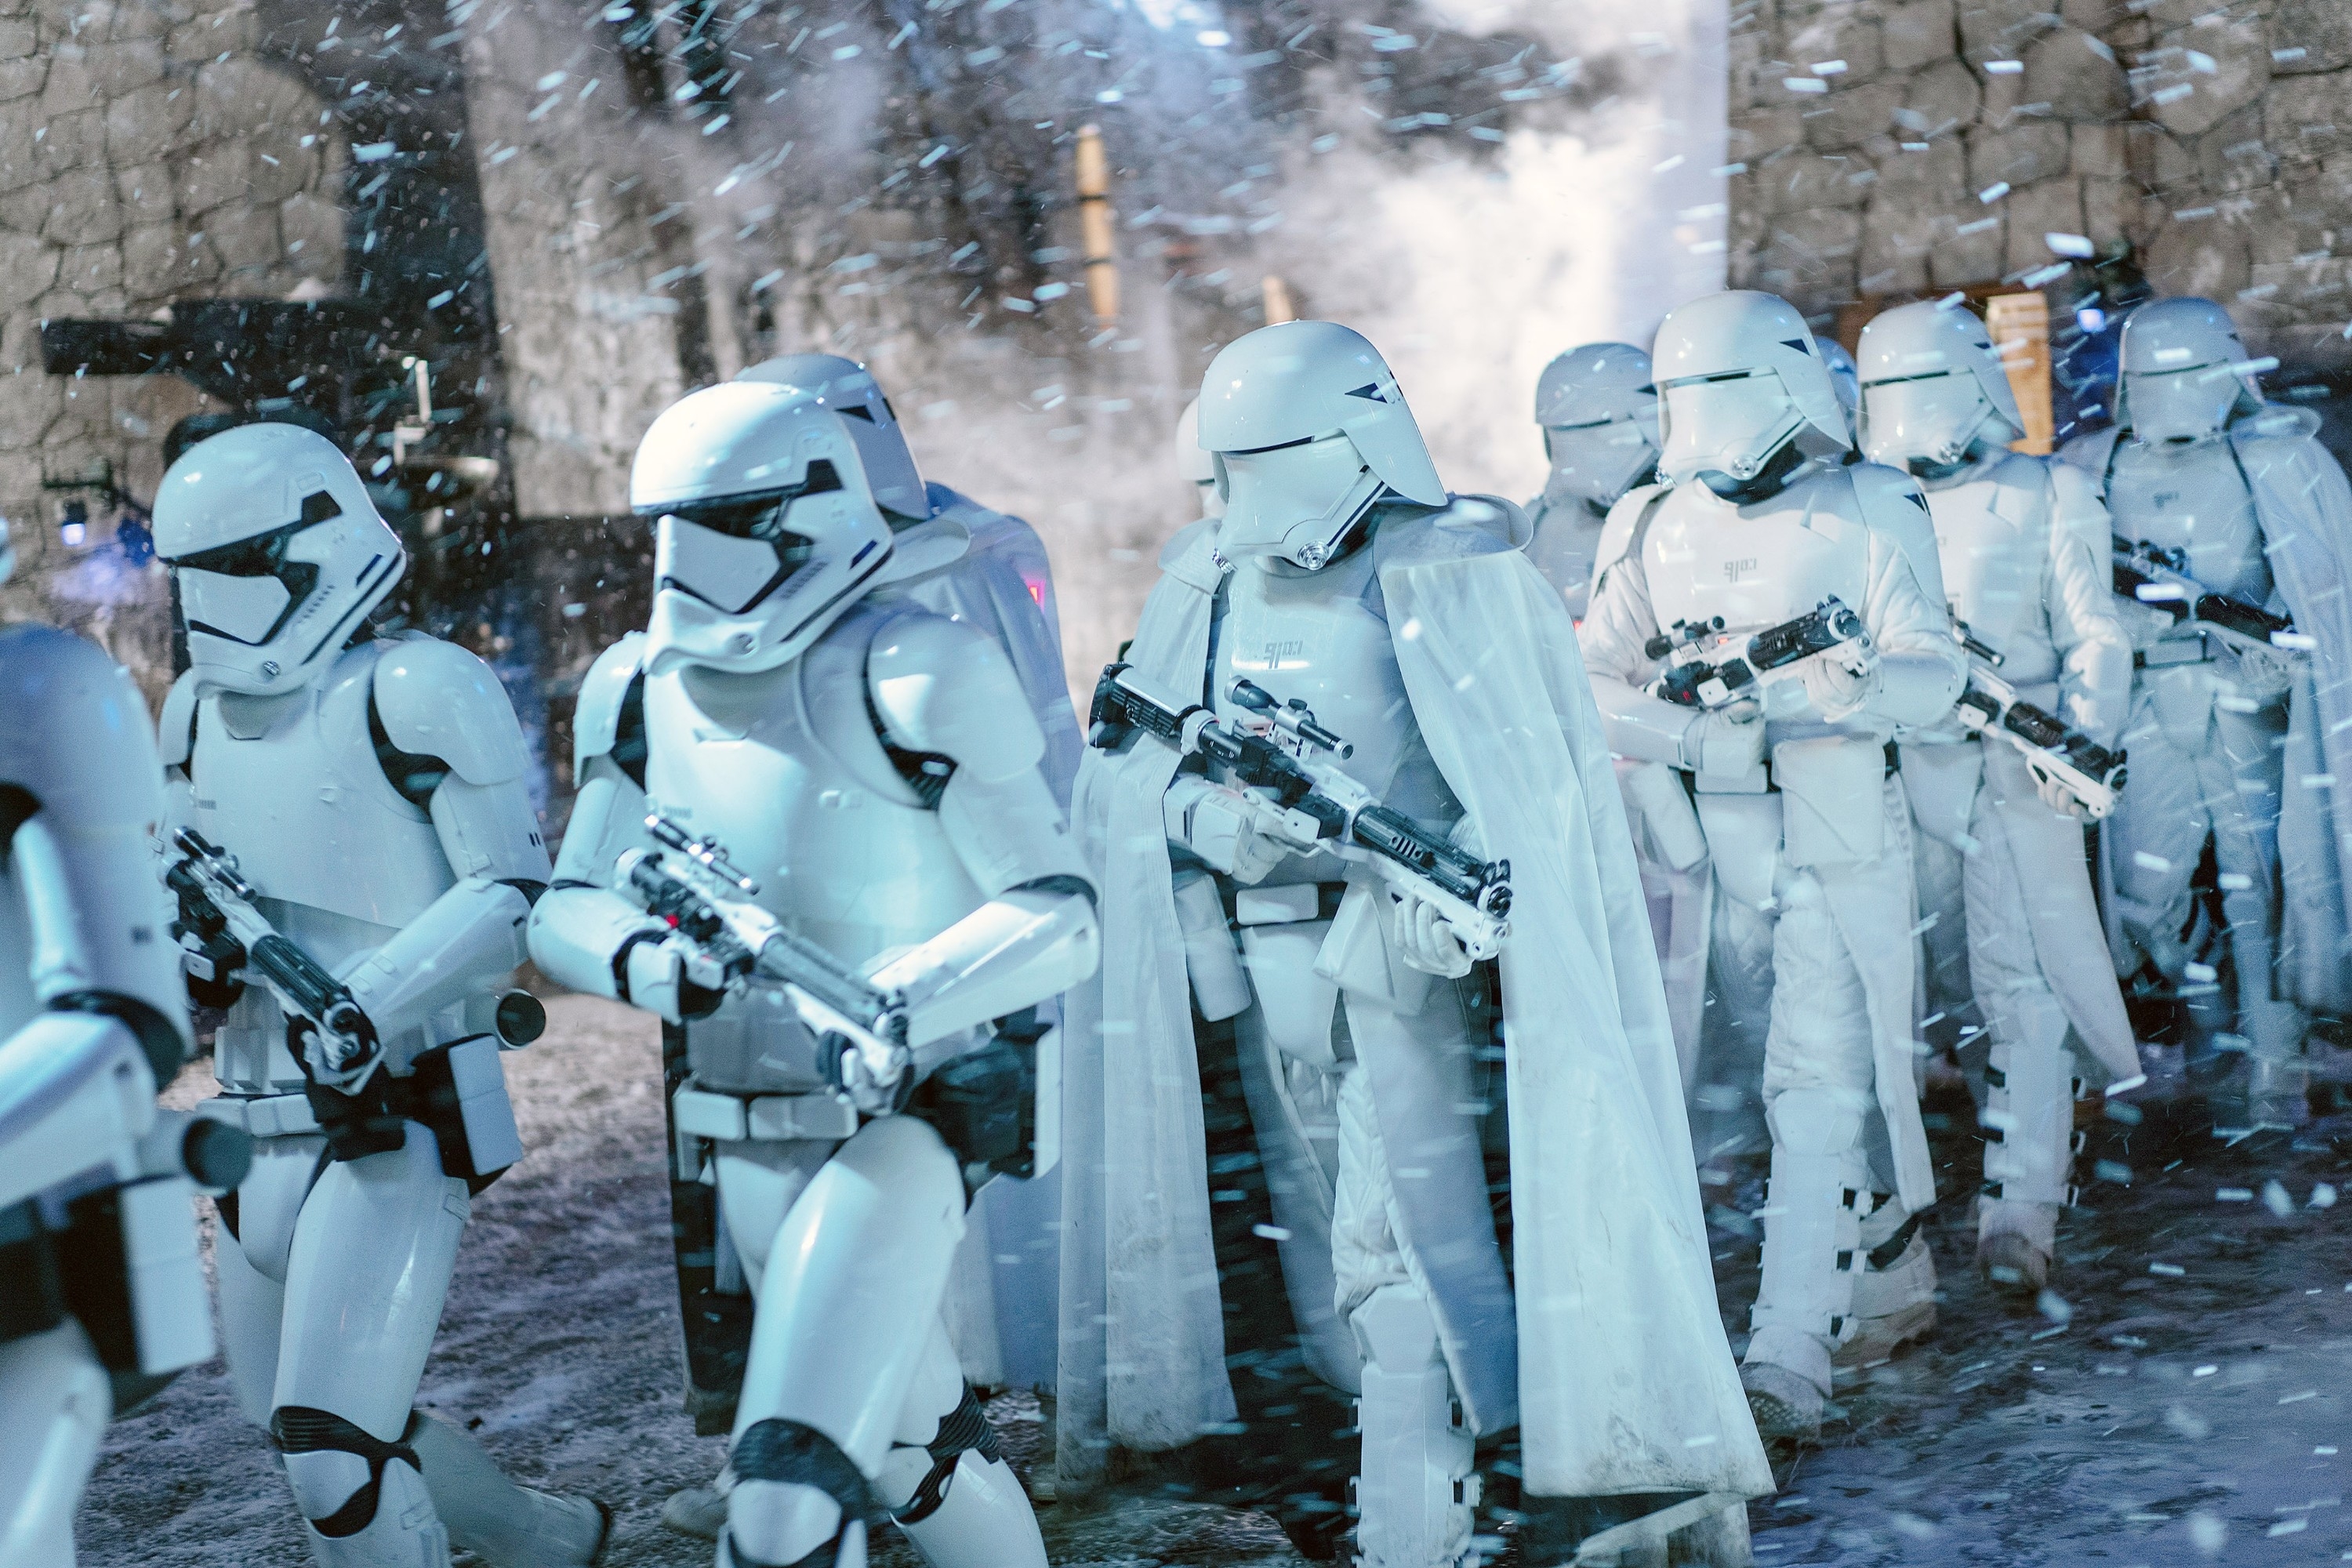 Group of Stormtroopers from Star Wars advancing in formation, with blasters ready, in a snowy setting